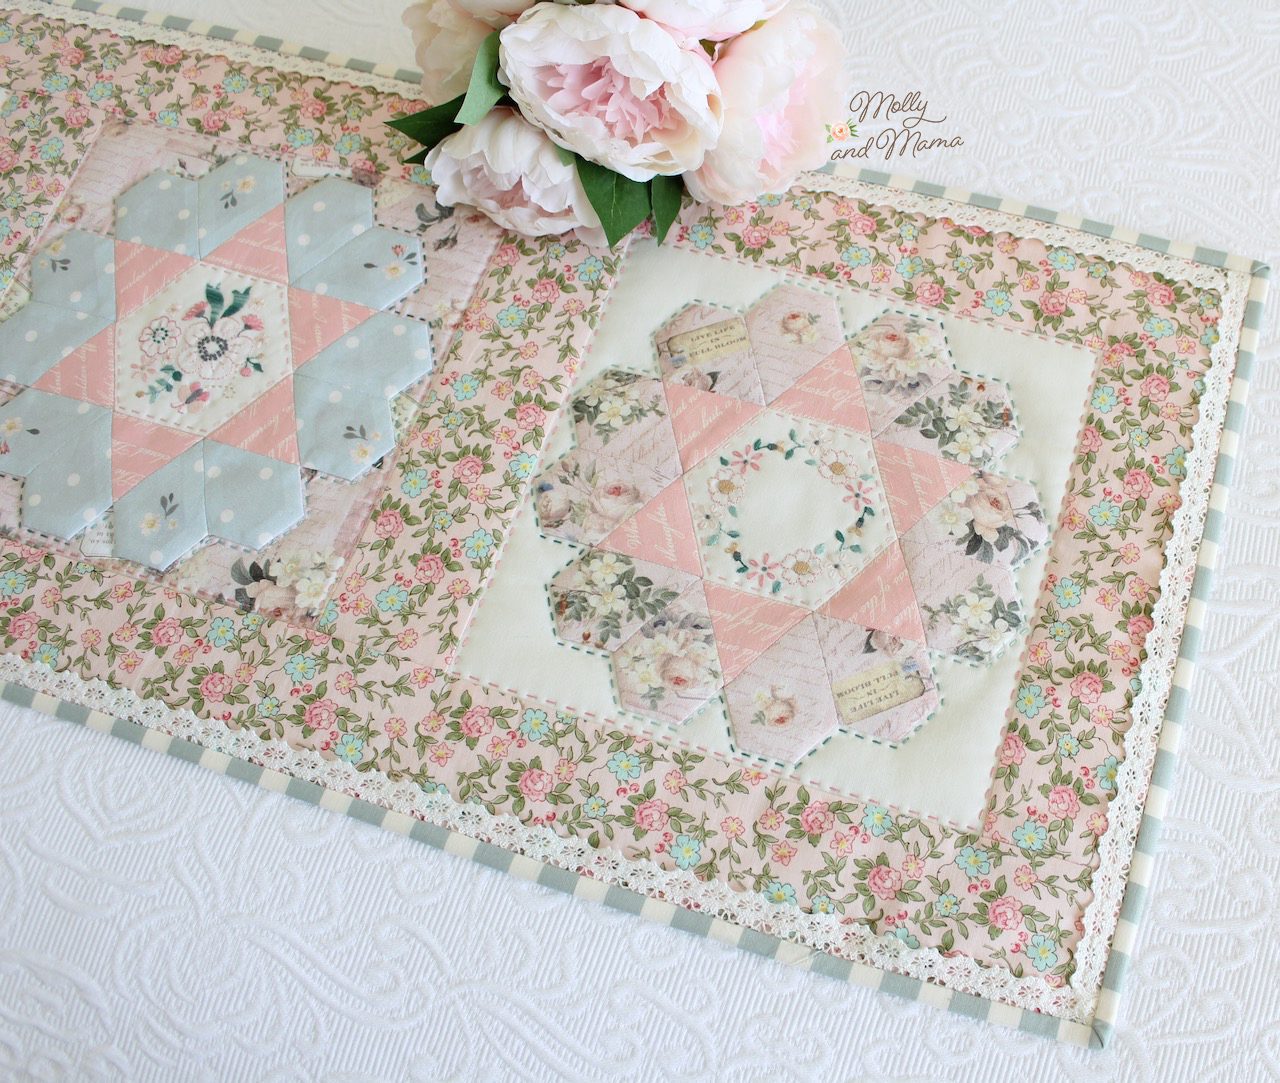 Introducing the Tilly's Tea Party Table Runner - Molly and Mama